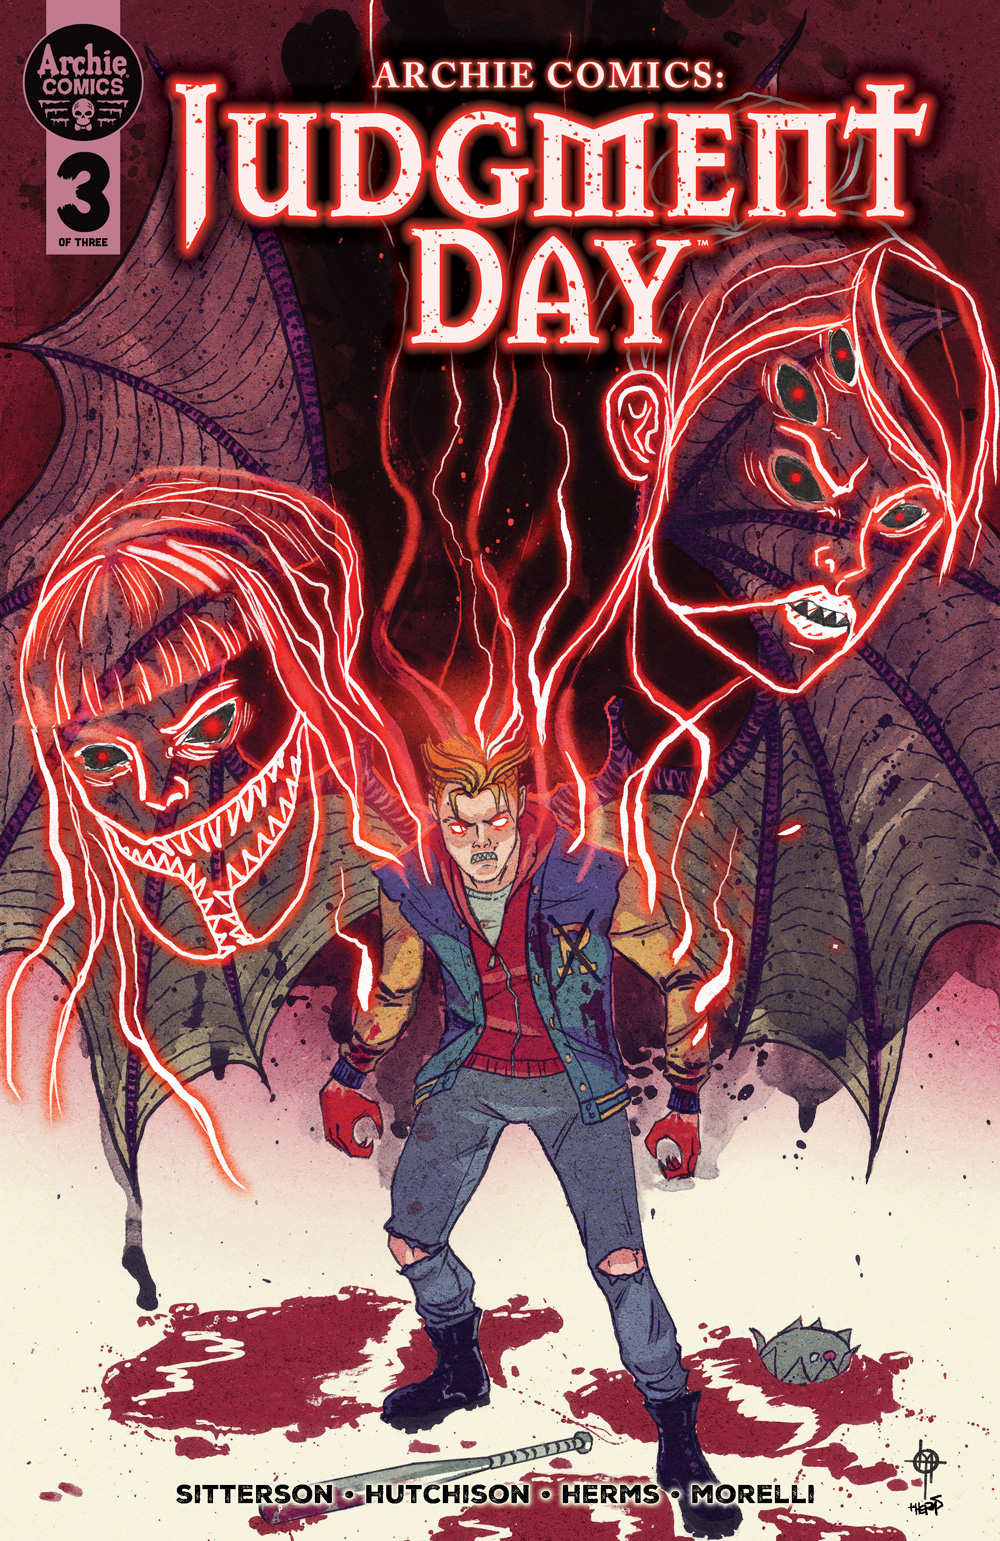 Archie, looking angry and menacing with glowing red eyes, vampire bat wings, magic bolts of light shooting off of his body, and blood on his hands, glowers at the viewer. Floating behind him are images made from the light bolts of two other unidentified characters with sharp teeth.